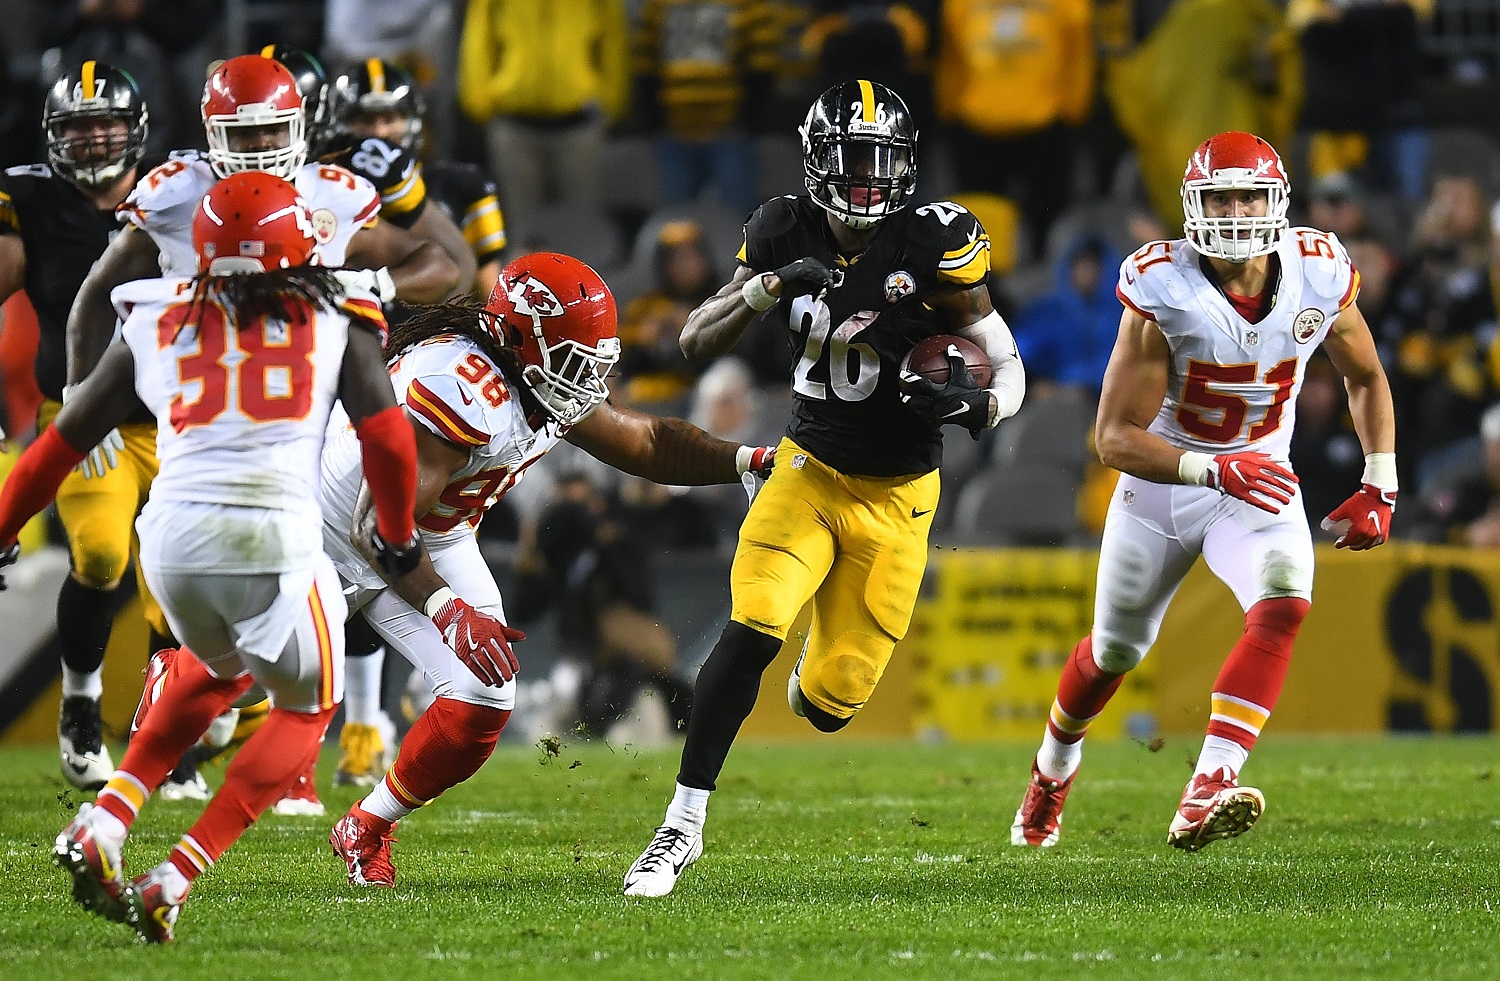 PITTSBURGH, PA - OCTOBER 02:  Le'Veon Bell #26 of the Pittsburgh Steelers rushes against the Kansas City Chiefs in the second half during the game at Heinz Field on October 2, 2016 in Pittsburgh, Pennsylvania. (Photo by Joe Sargent/Getty Images)